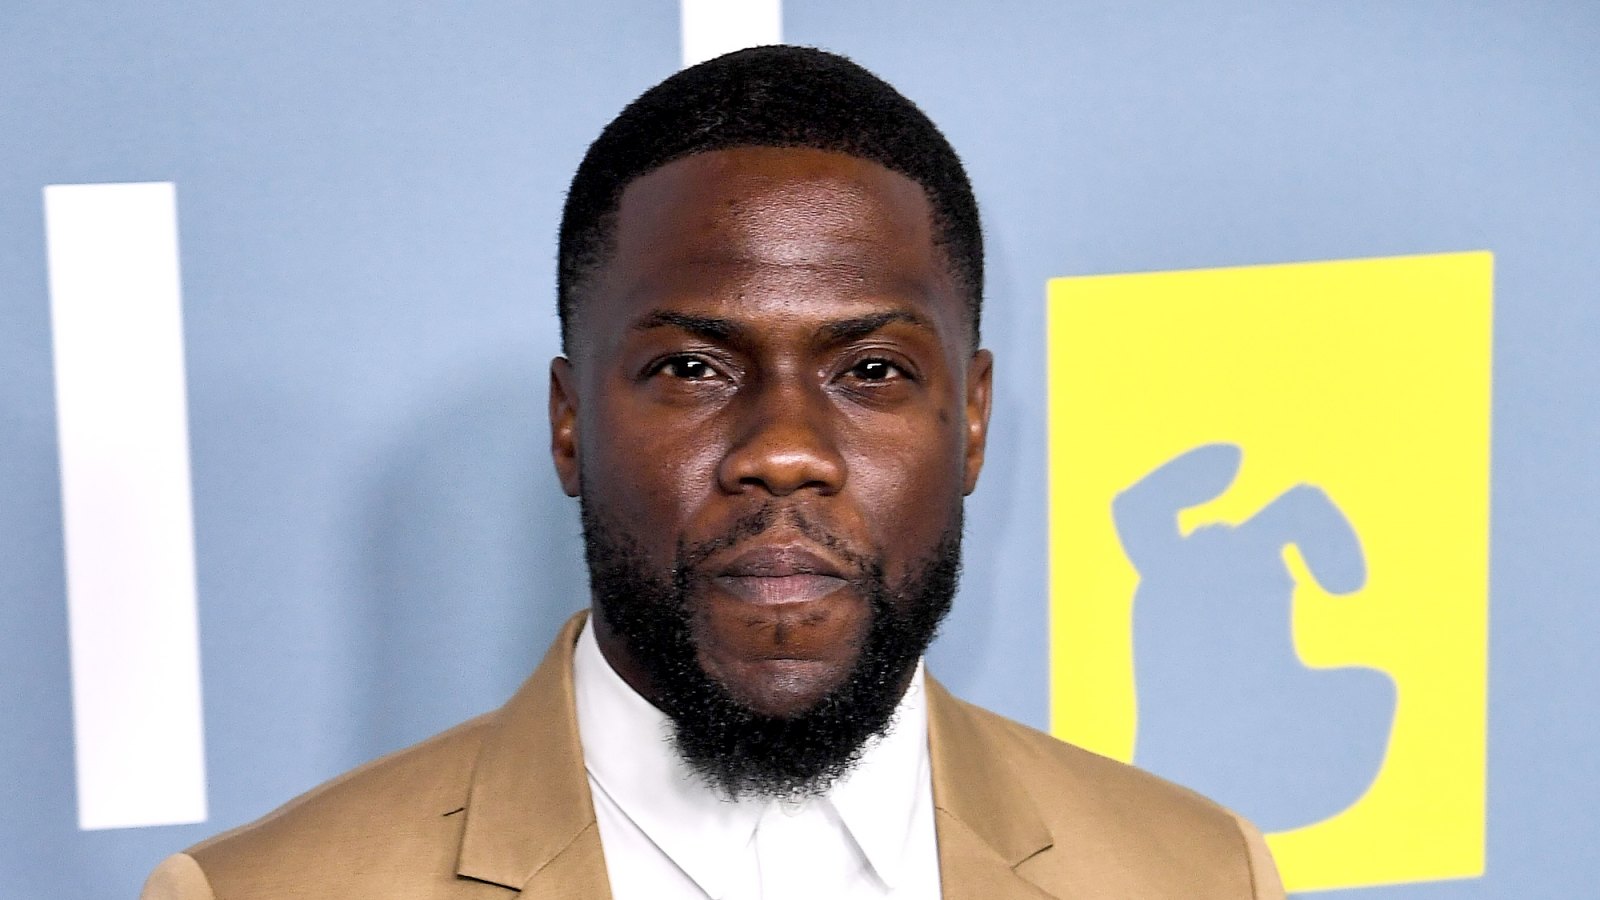 Kevin-hart-sued-for-assault